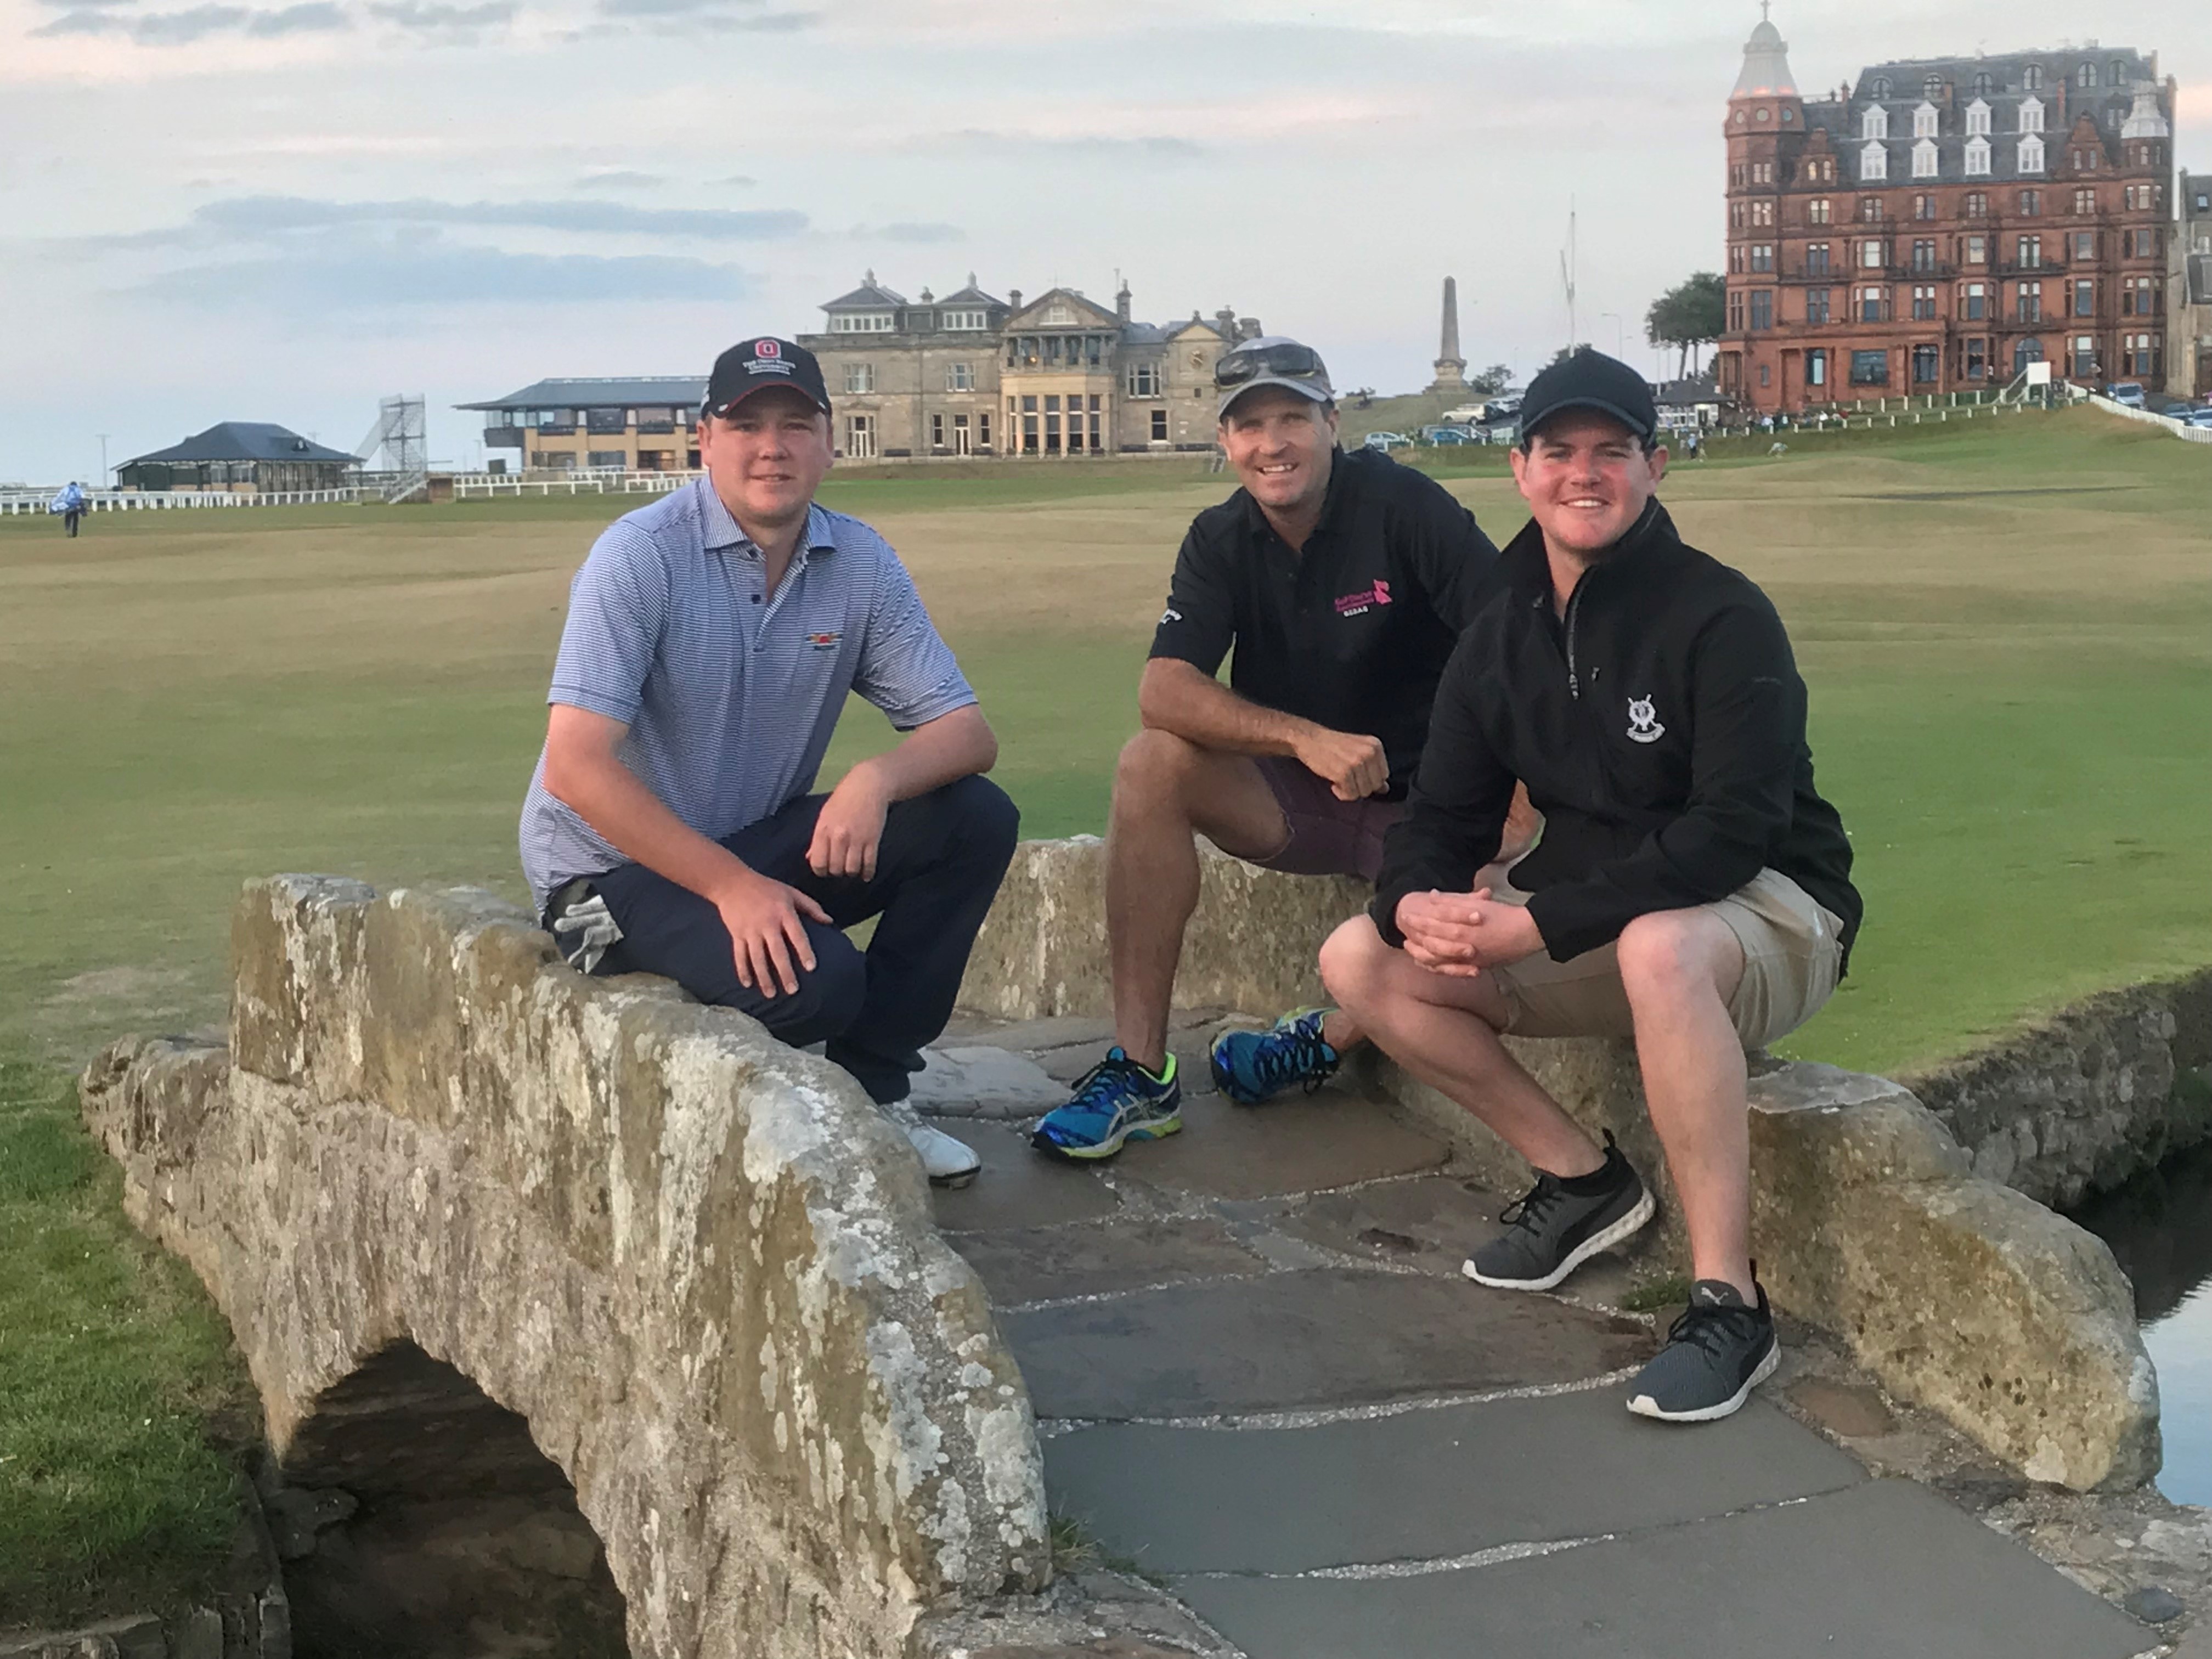 Trip of a lifetime for 3 Australian Assistant Superintendents to St Andrews Links in Scotland